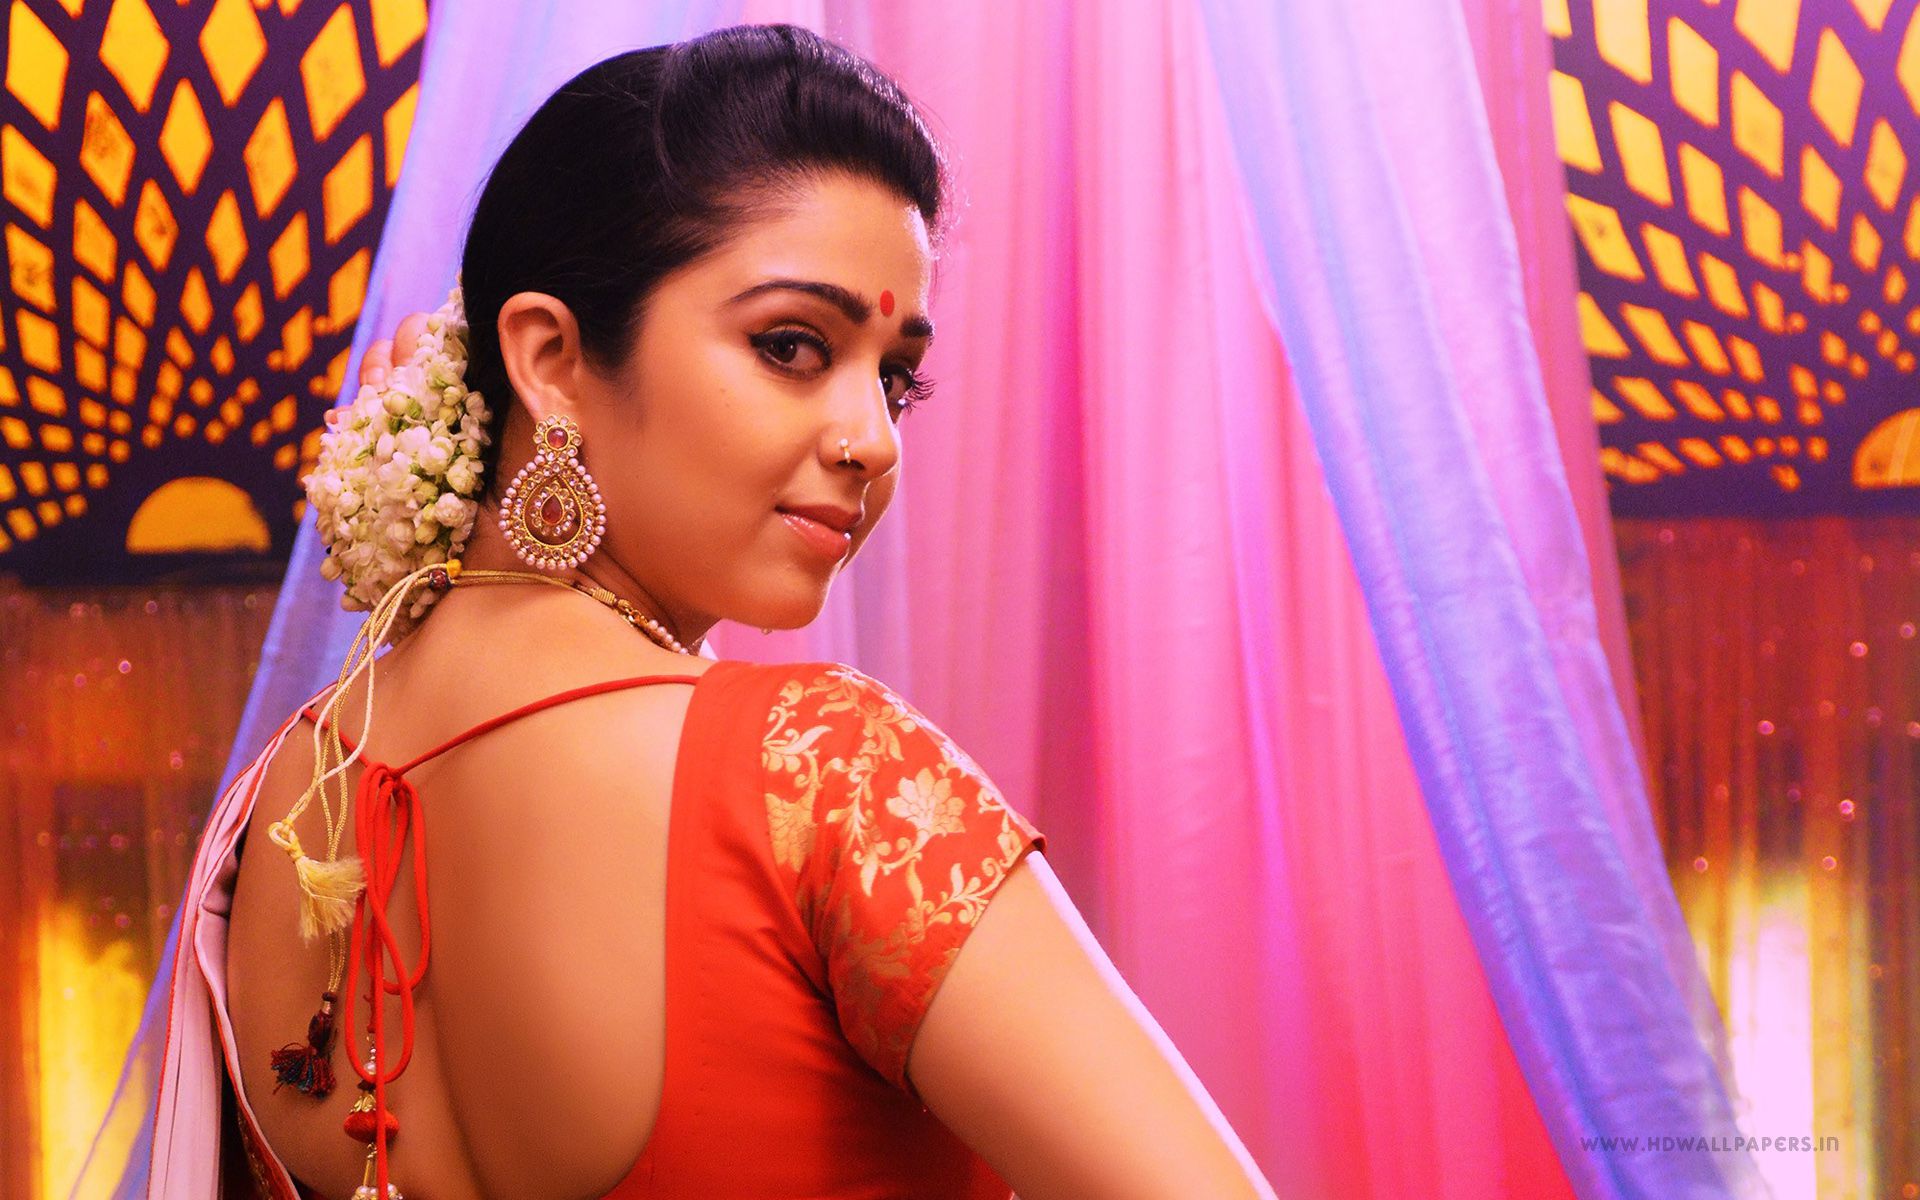 Gorgeous Actress Charmi Kaur Sexy Wallpapers In HD ...